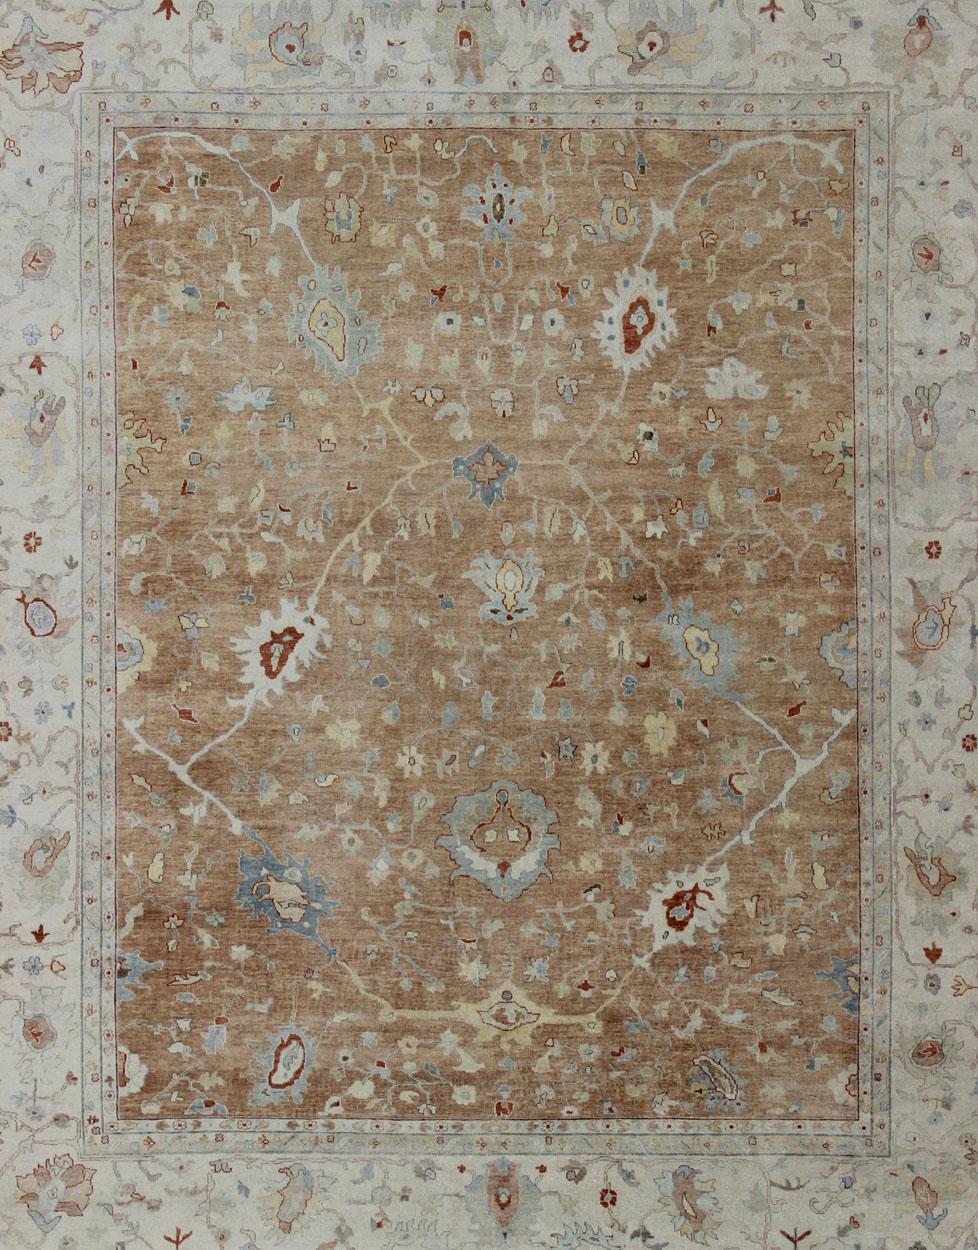 Oushak rug with blue, cream, and coral, neutral color palette and all-over flower design, Keivan Woven Arts / rug/BDH-743526, country of origin / type: India/ Oushak

This hand knotted Oushak rug features a beautiful design rendered in light blue,